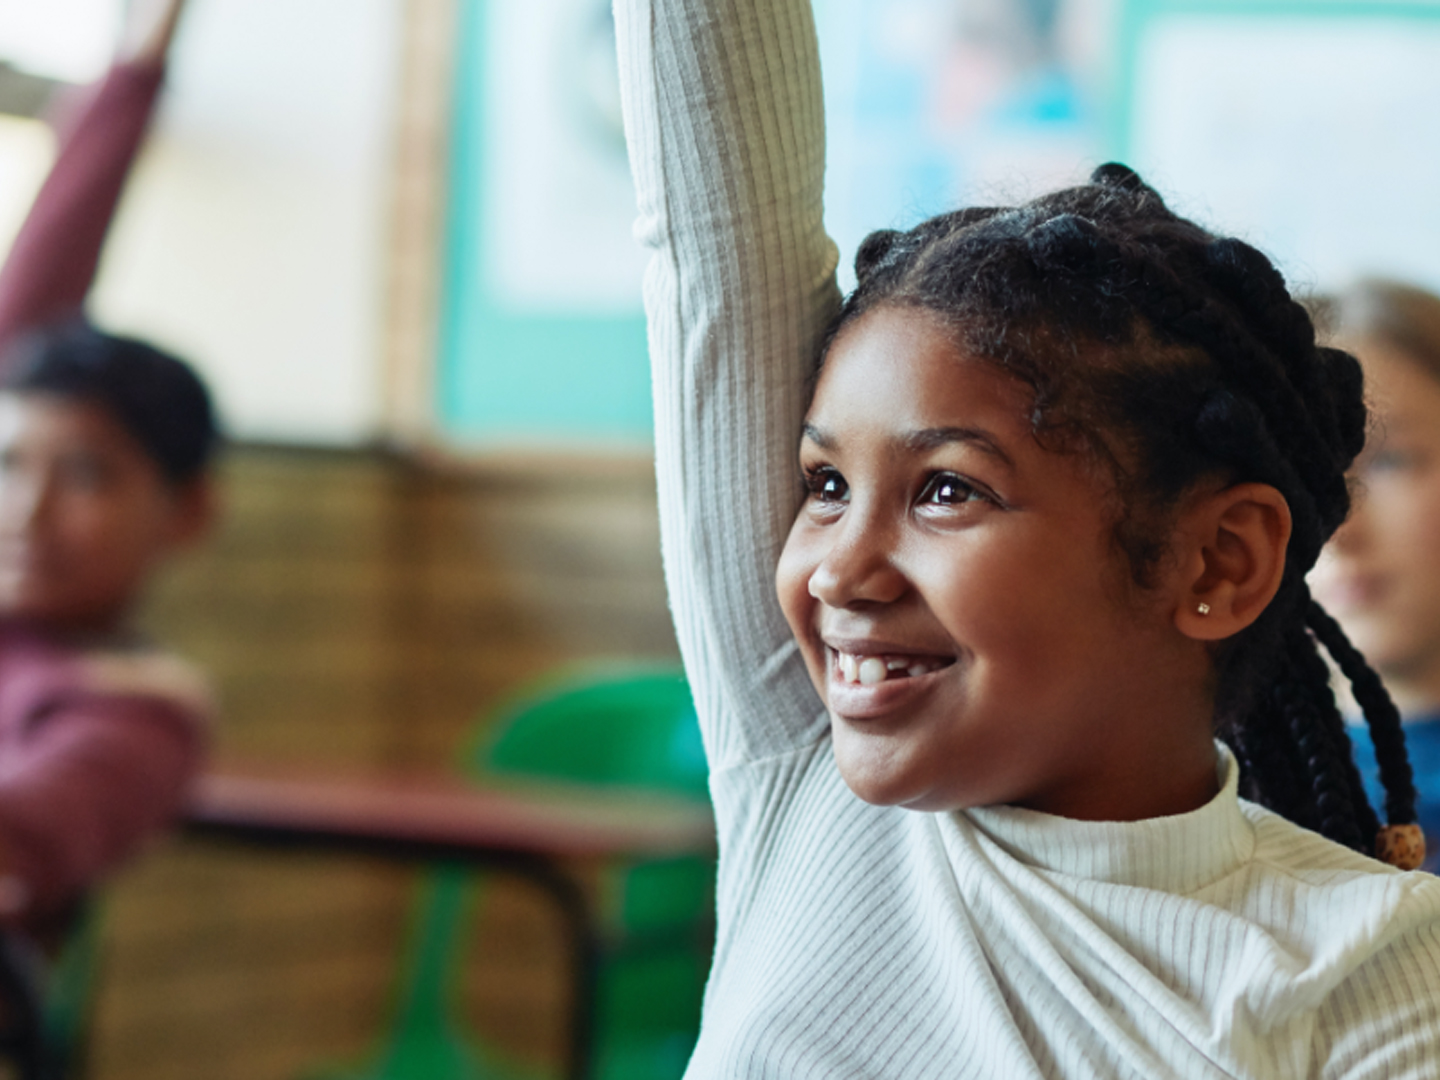 Girl in classroom smiling with raised hand.